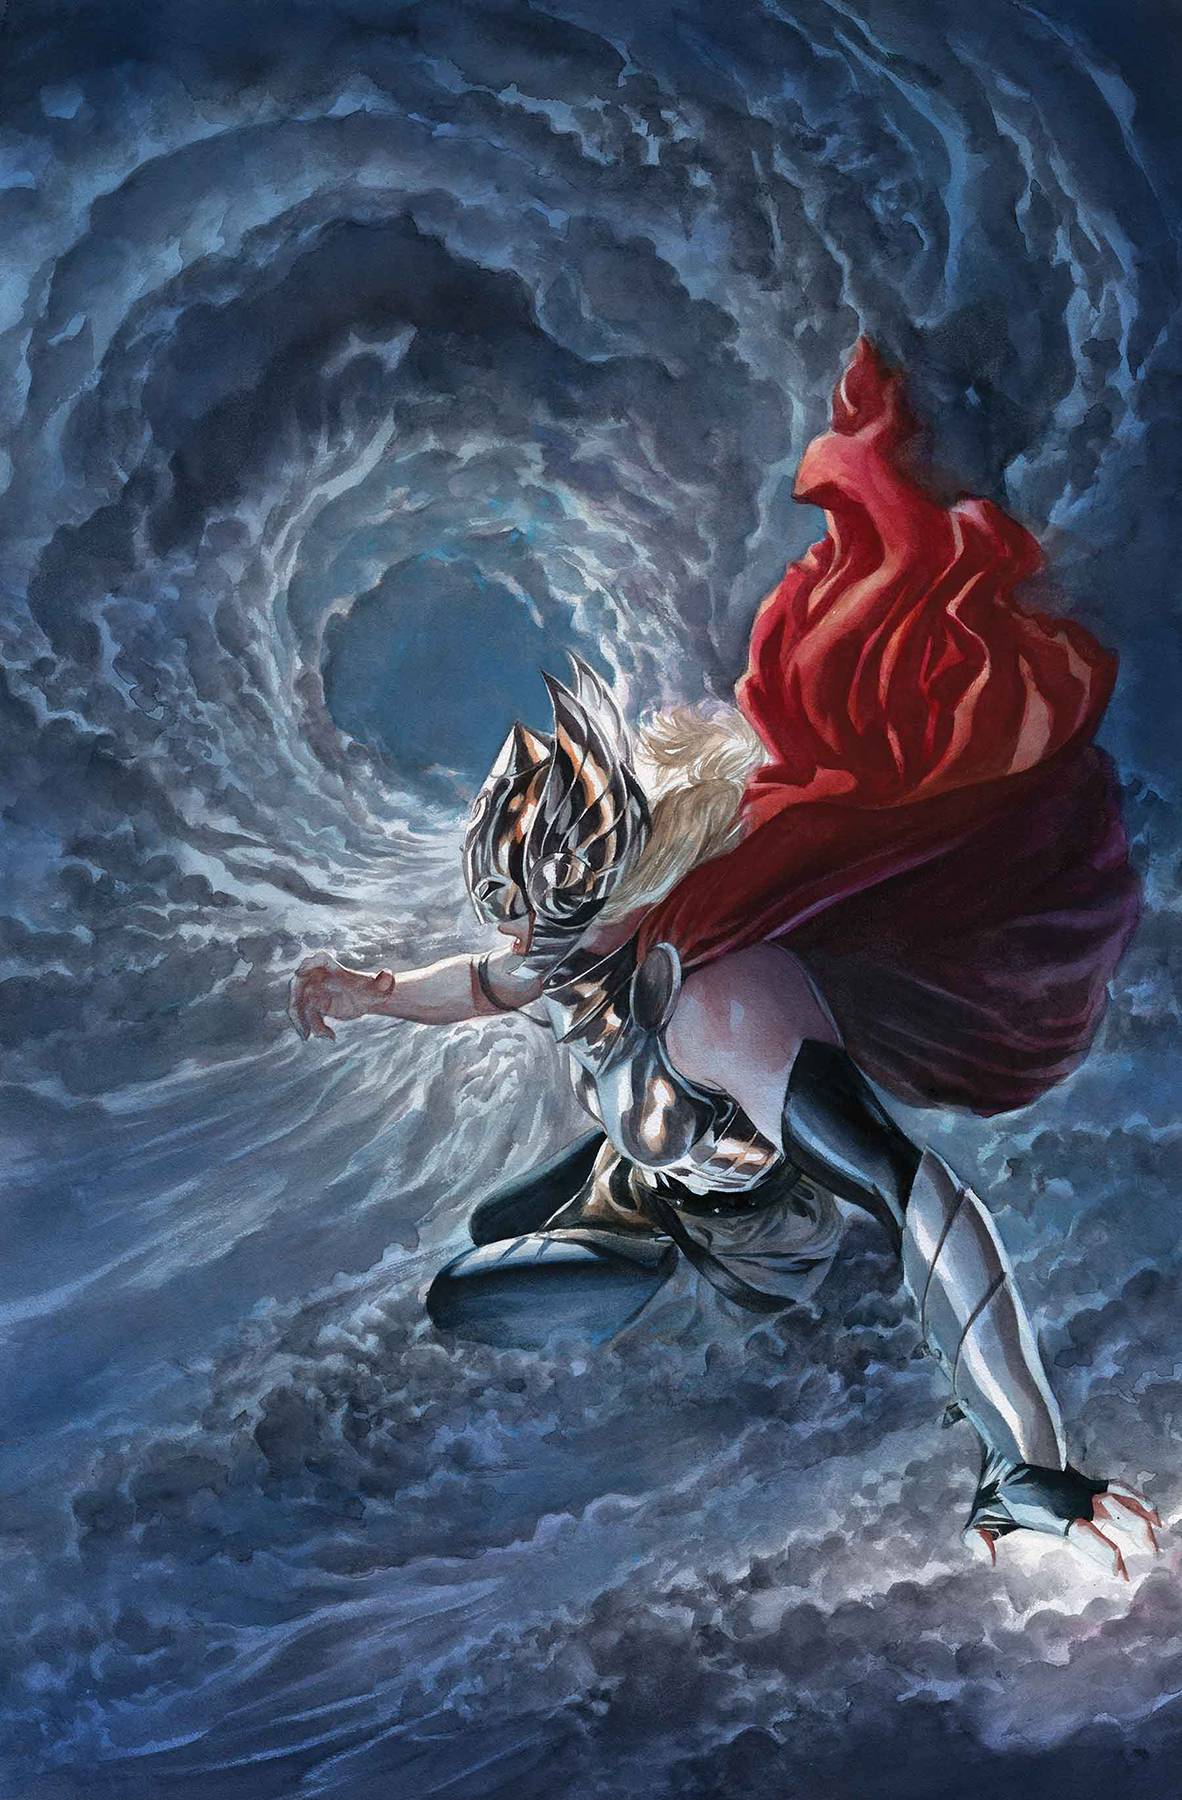 AVENGERS #9 BY ALEX ROSS POSTER